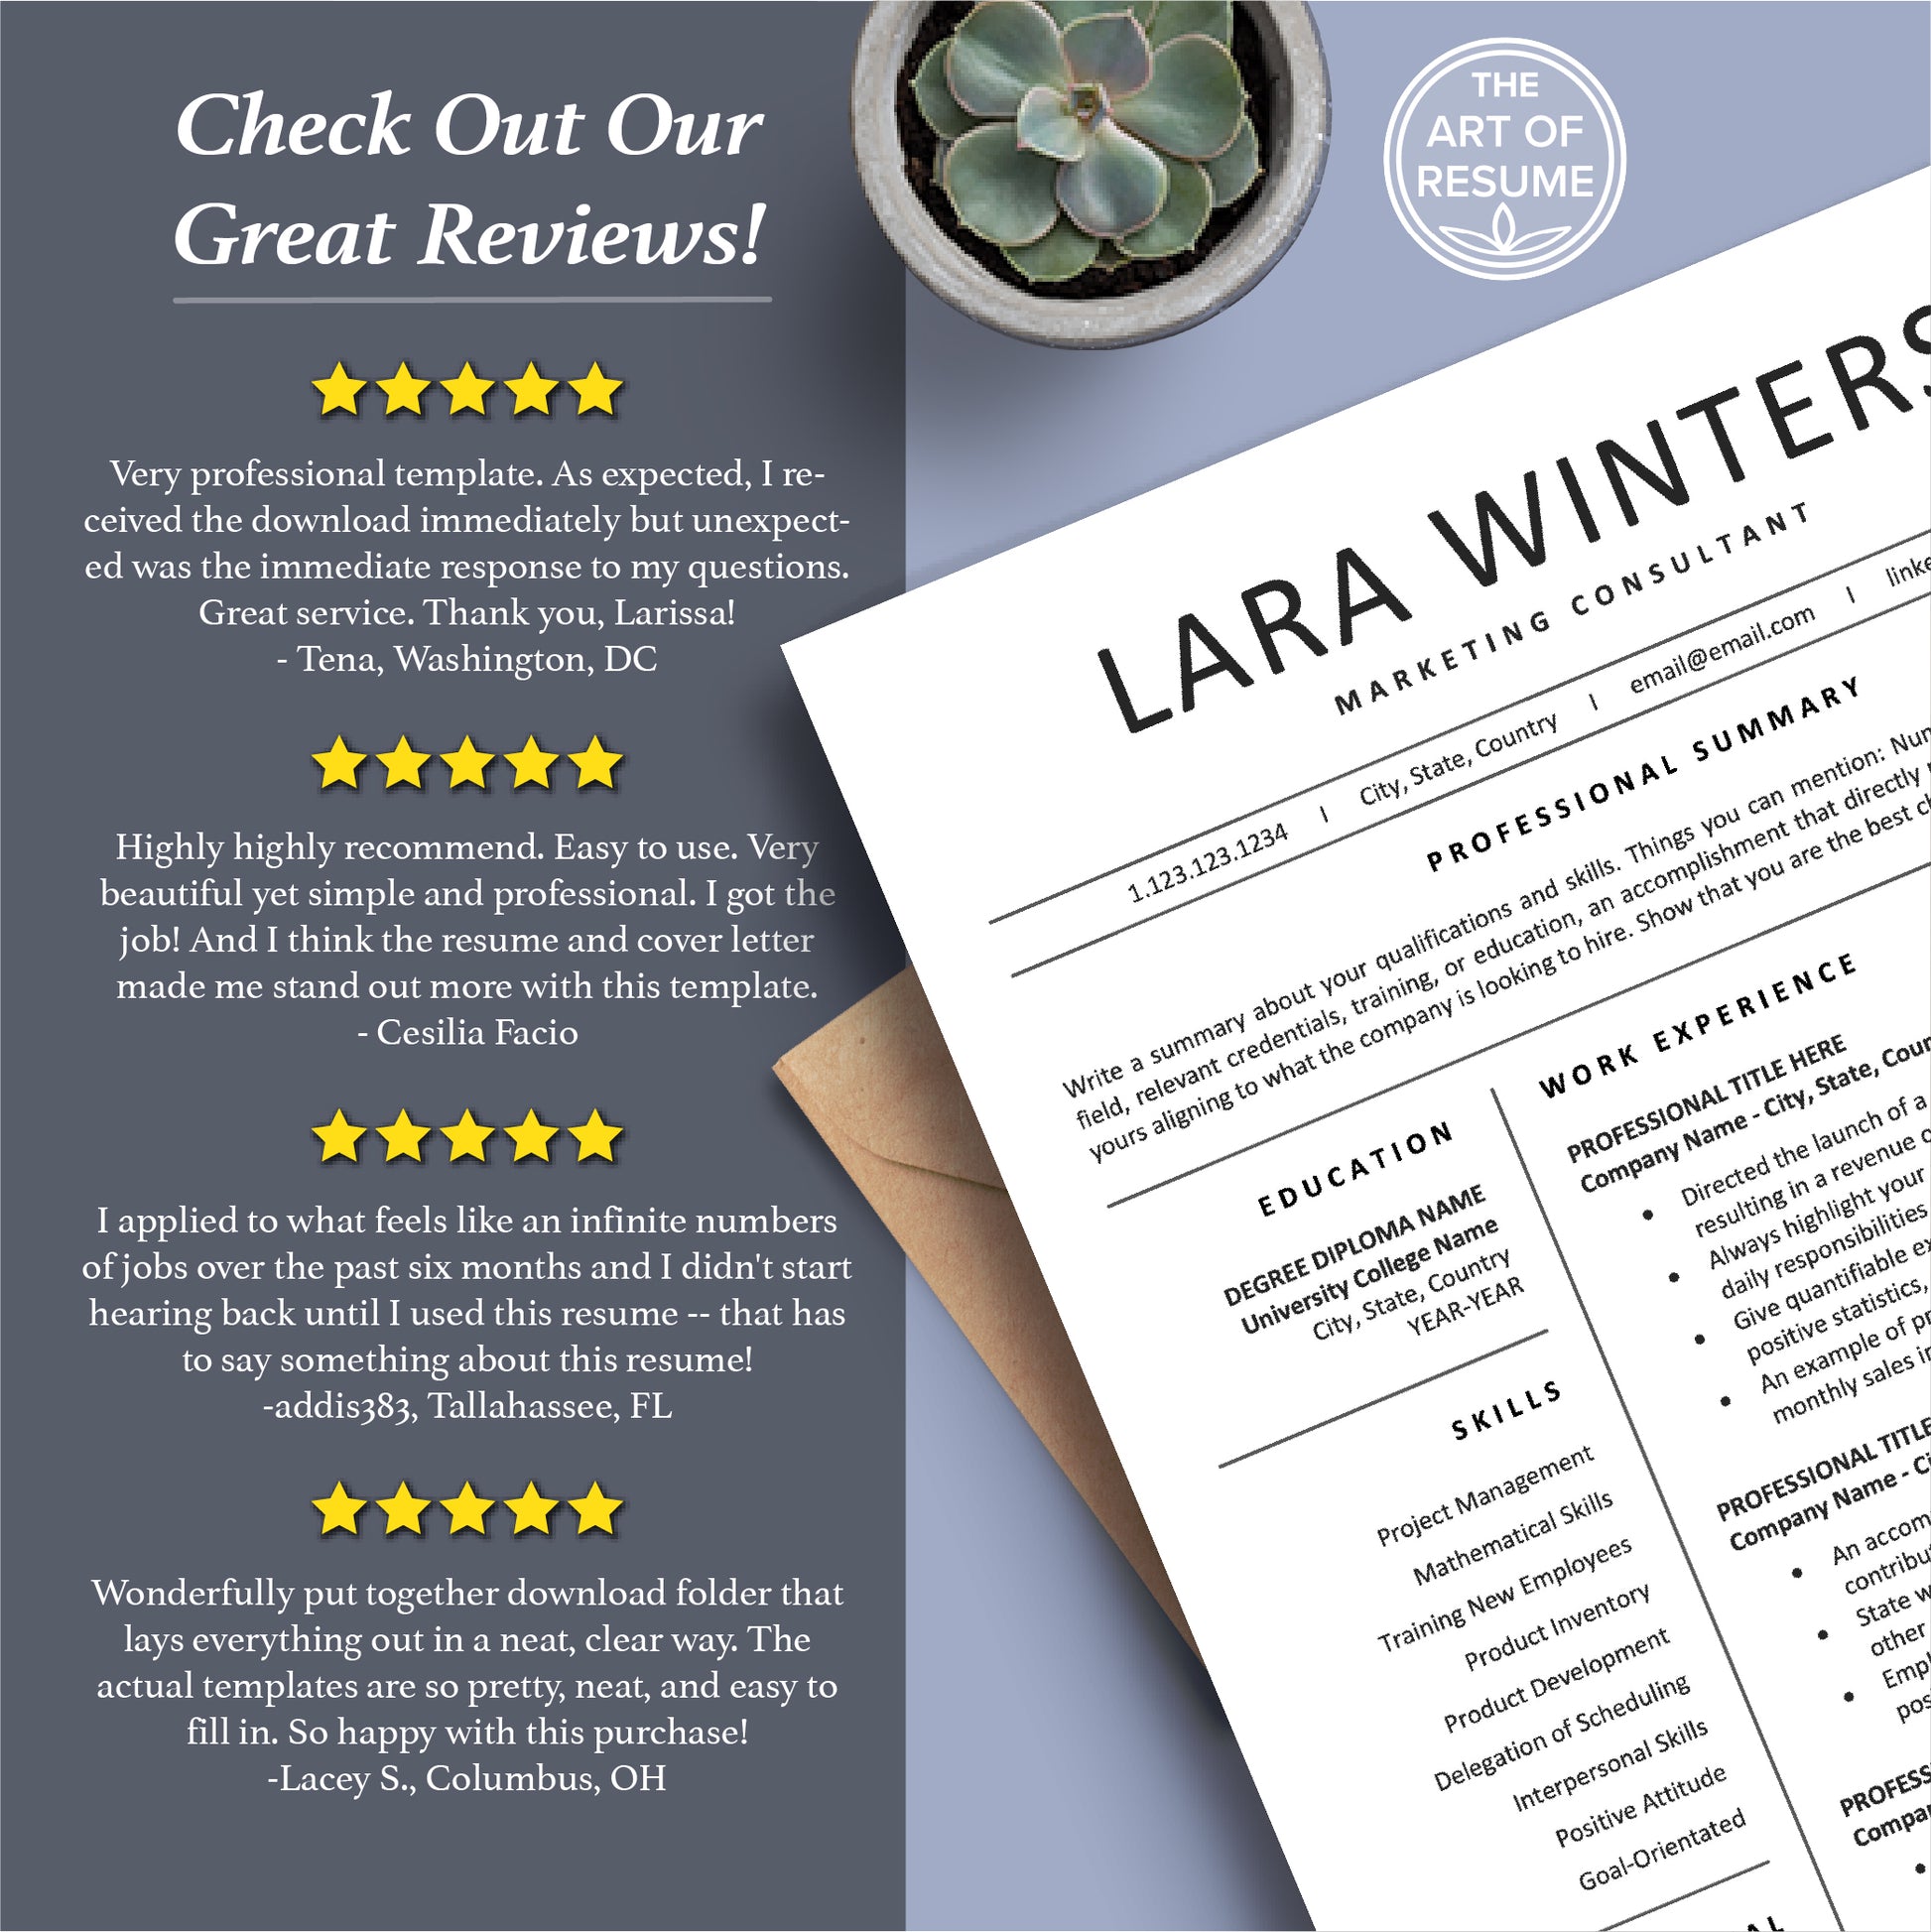 The Art of Resume Templates |  Professional Simple Resume CV Templates Online 5-Star Reviews